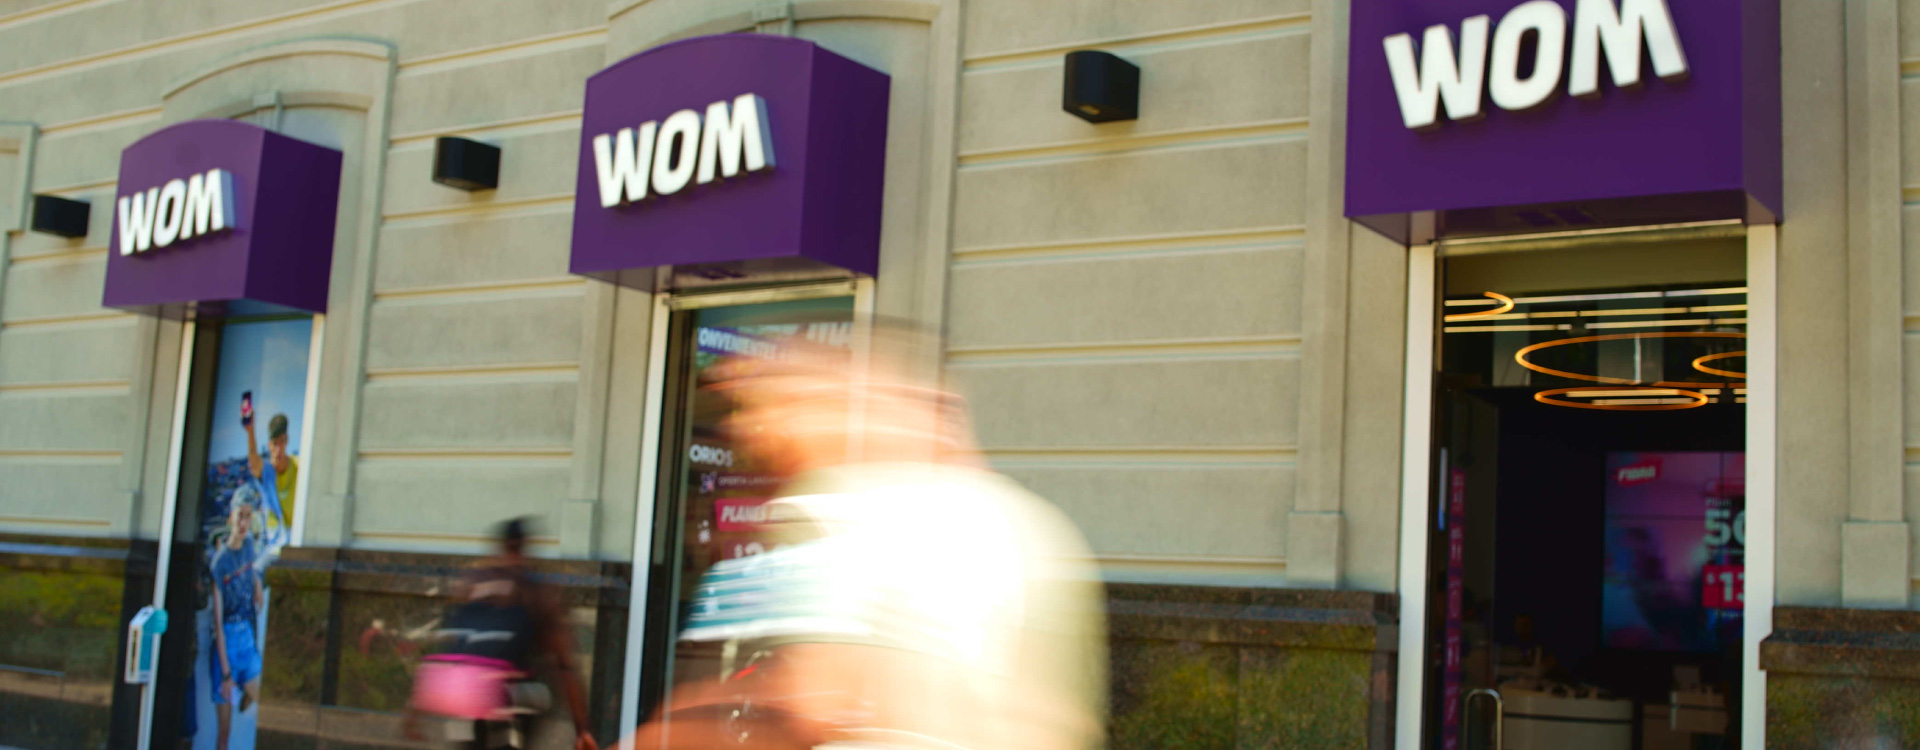 WOM consolidates its position as the second largest operator in the mobile market and already has more than 8 million customers